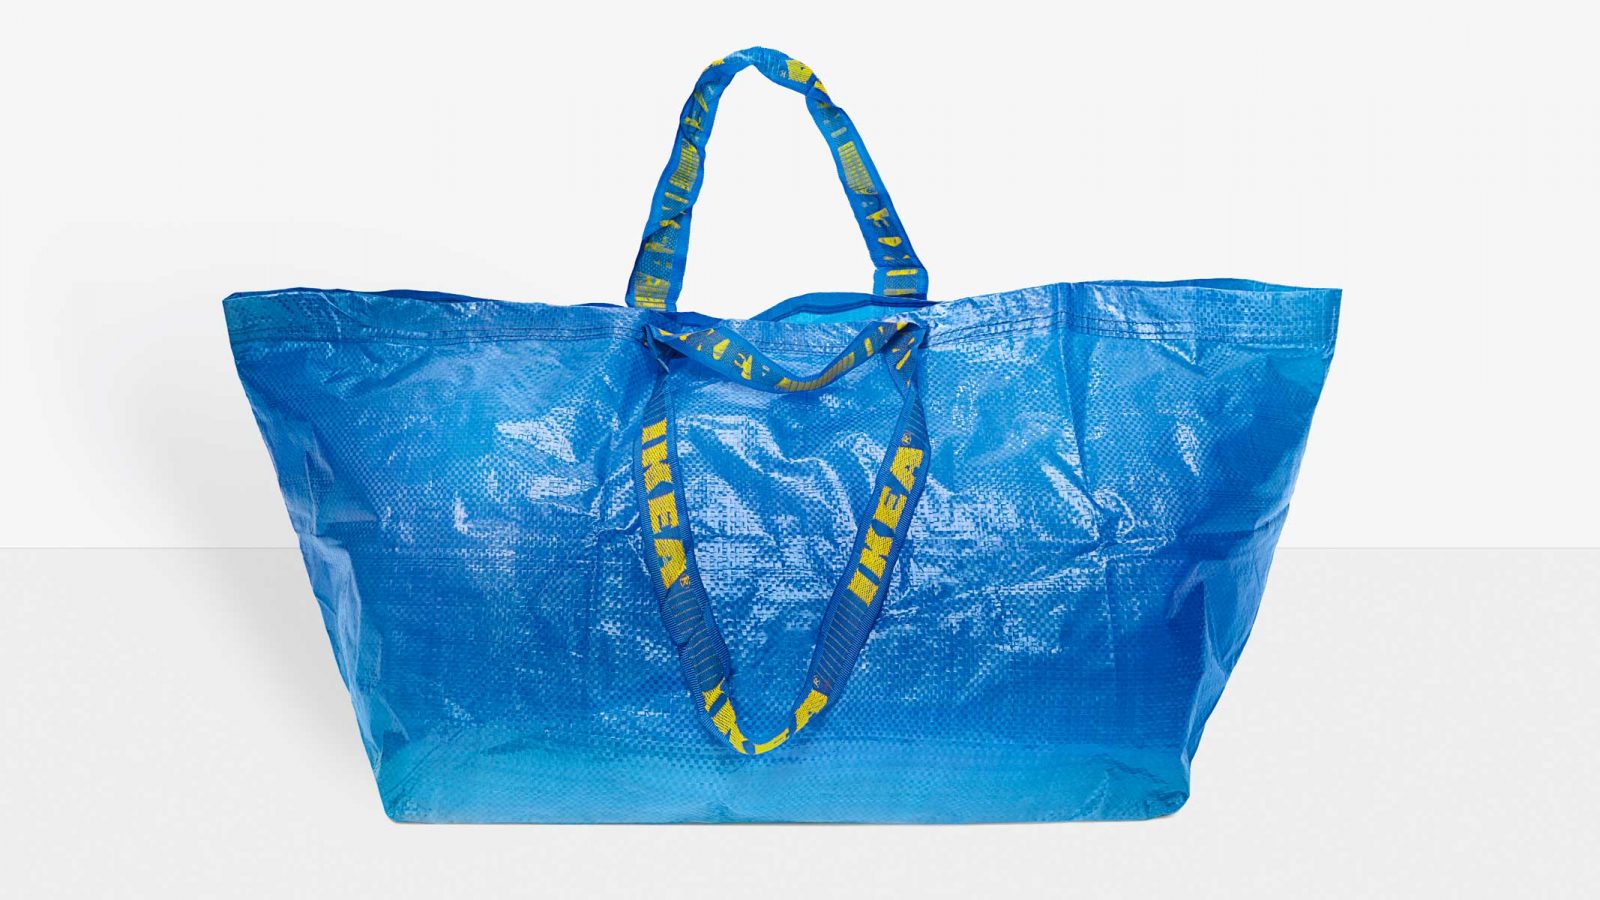 Recycle by creating your own luxury shopping bag on a budget